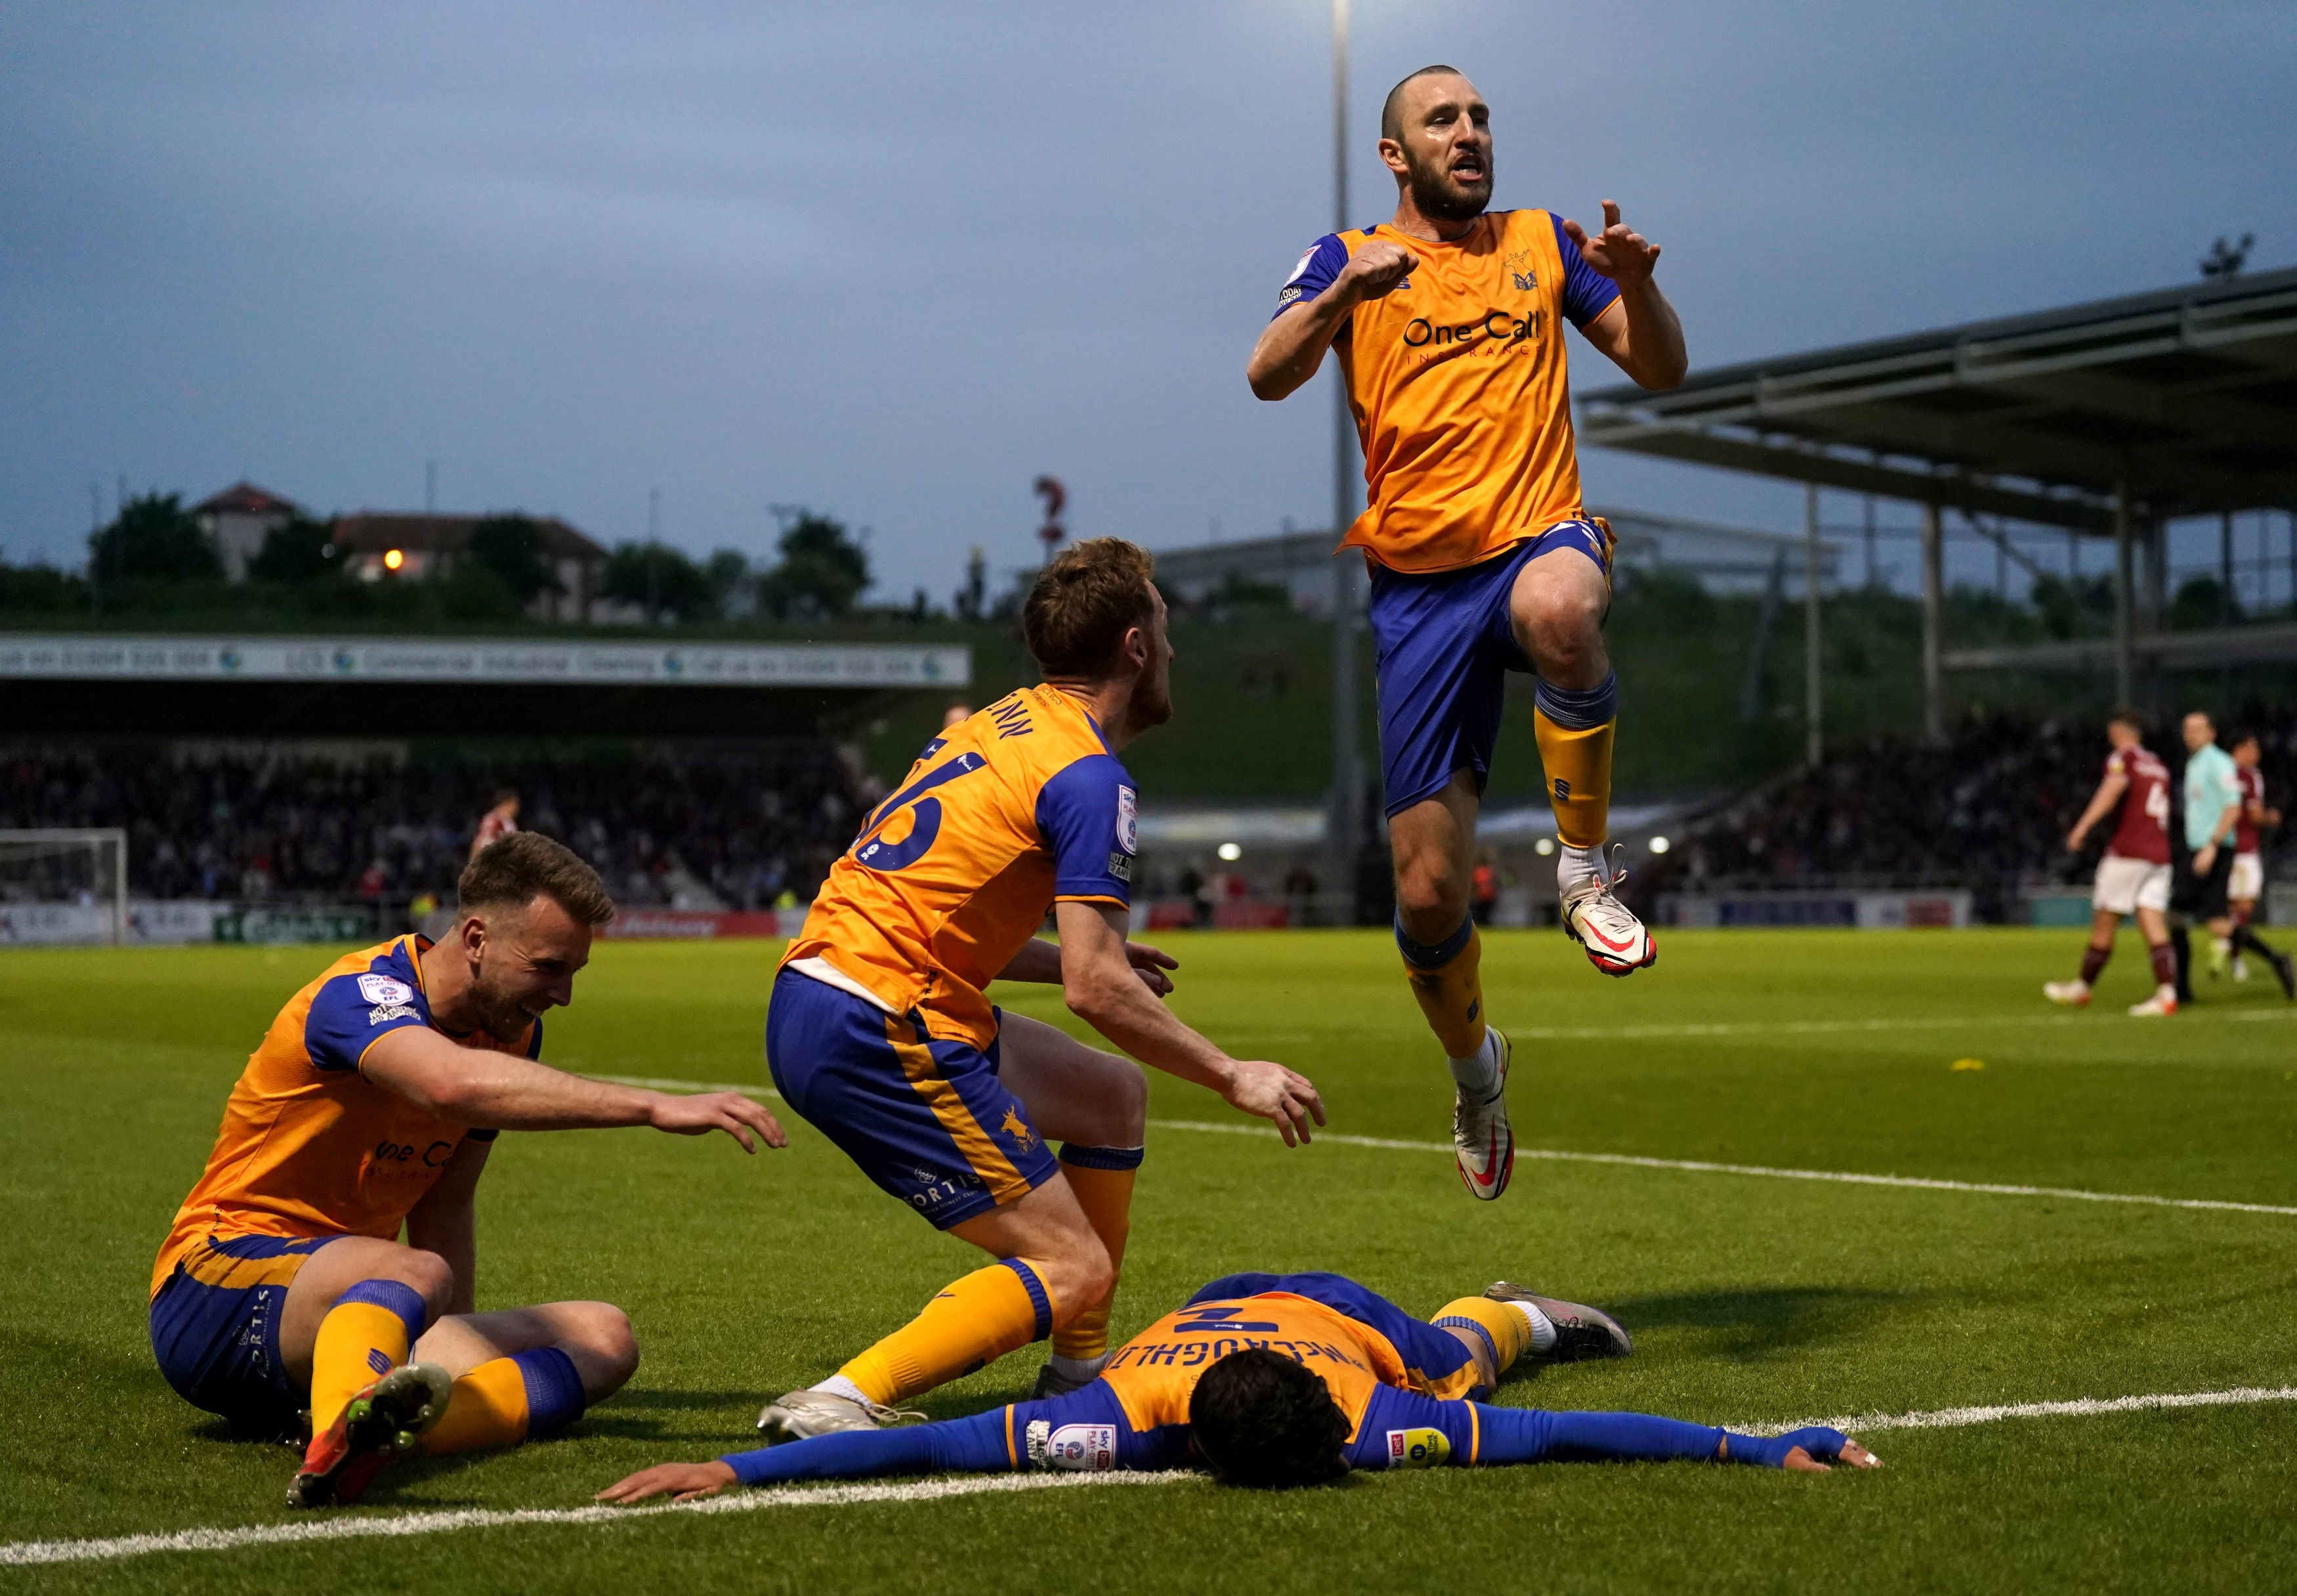 Mansfield secured their spot at Wembley